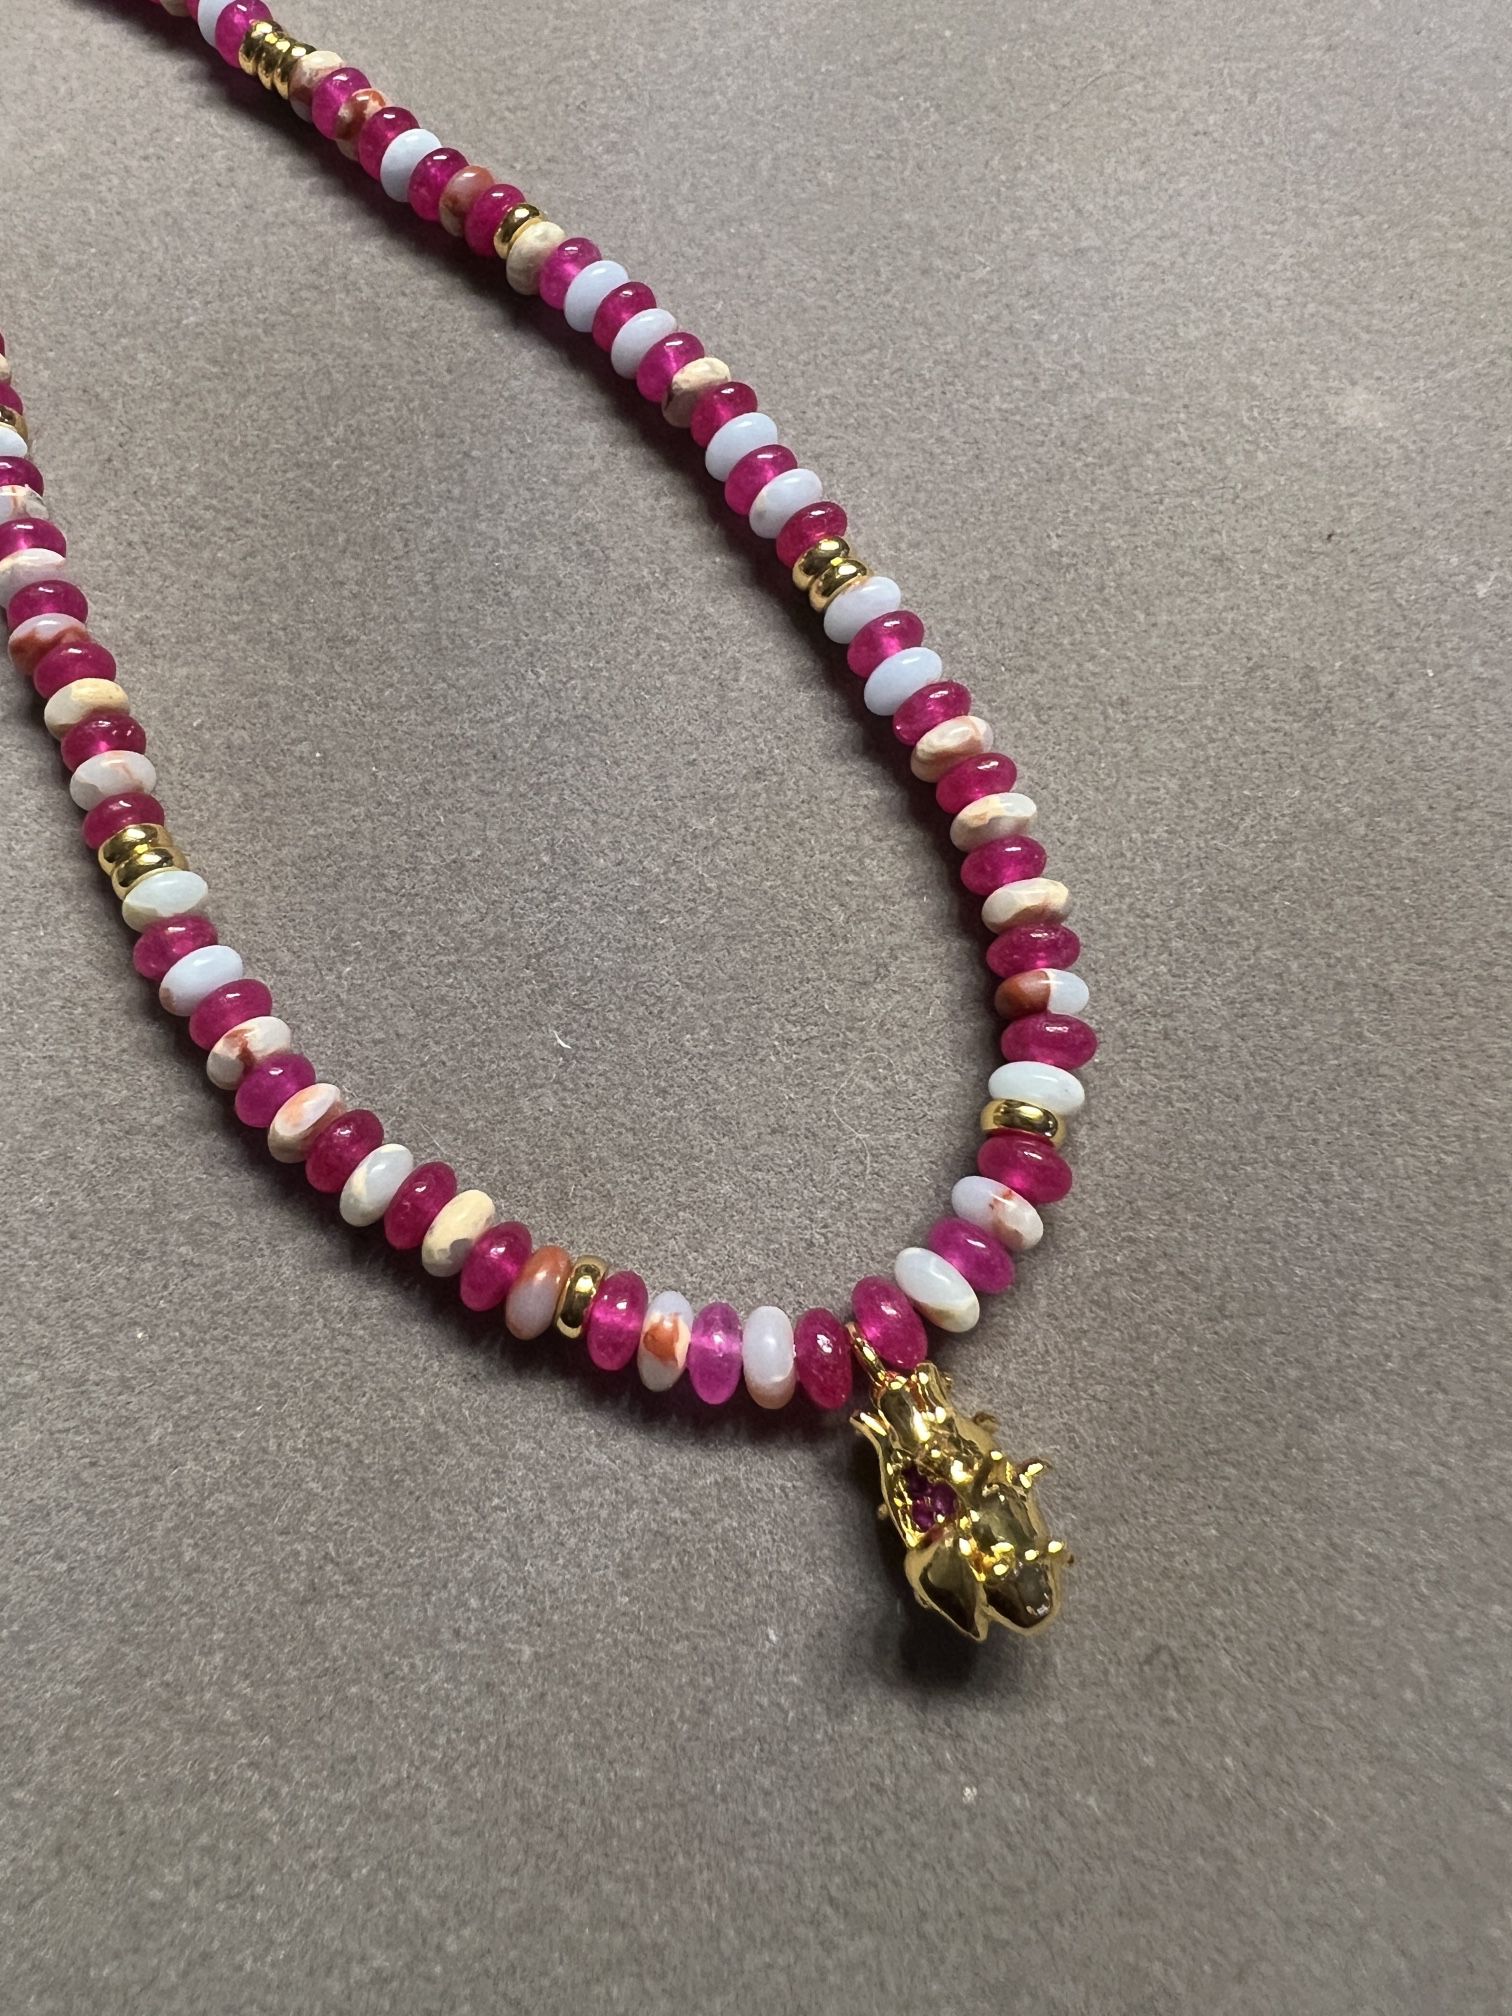 Natural stone dragon fruit necklace